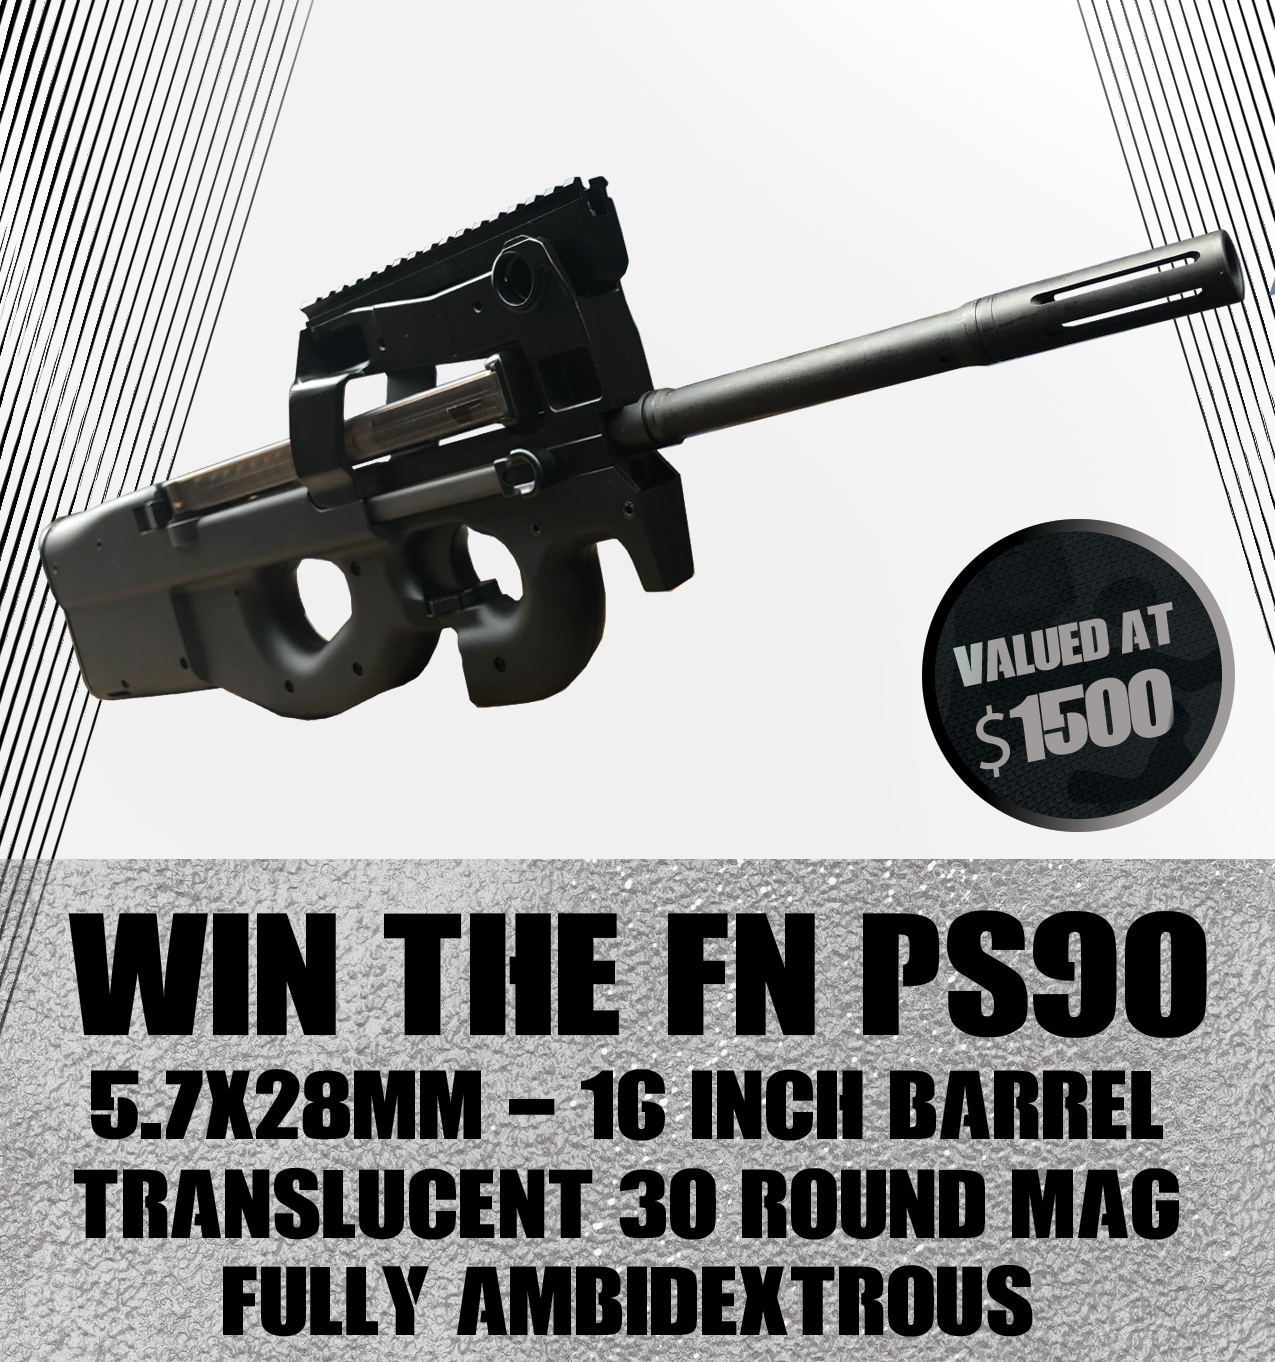 Contest - Win A FN PS90 Rifle